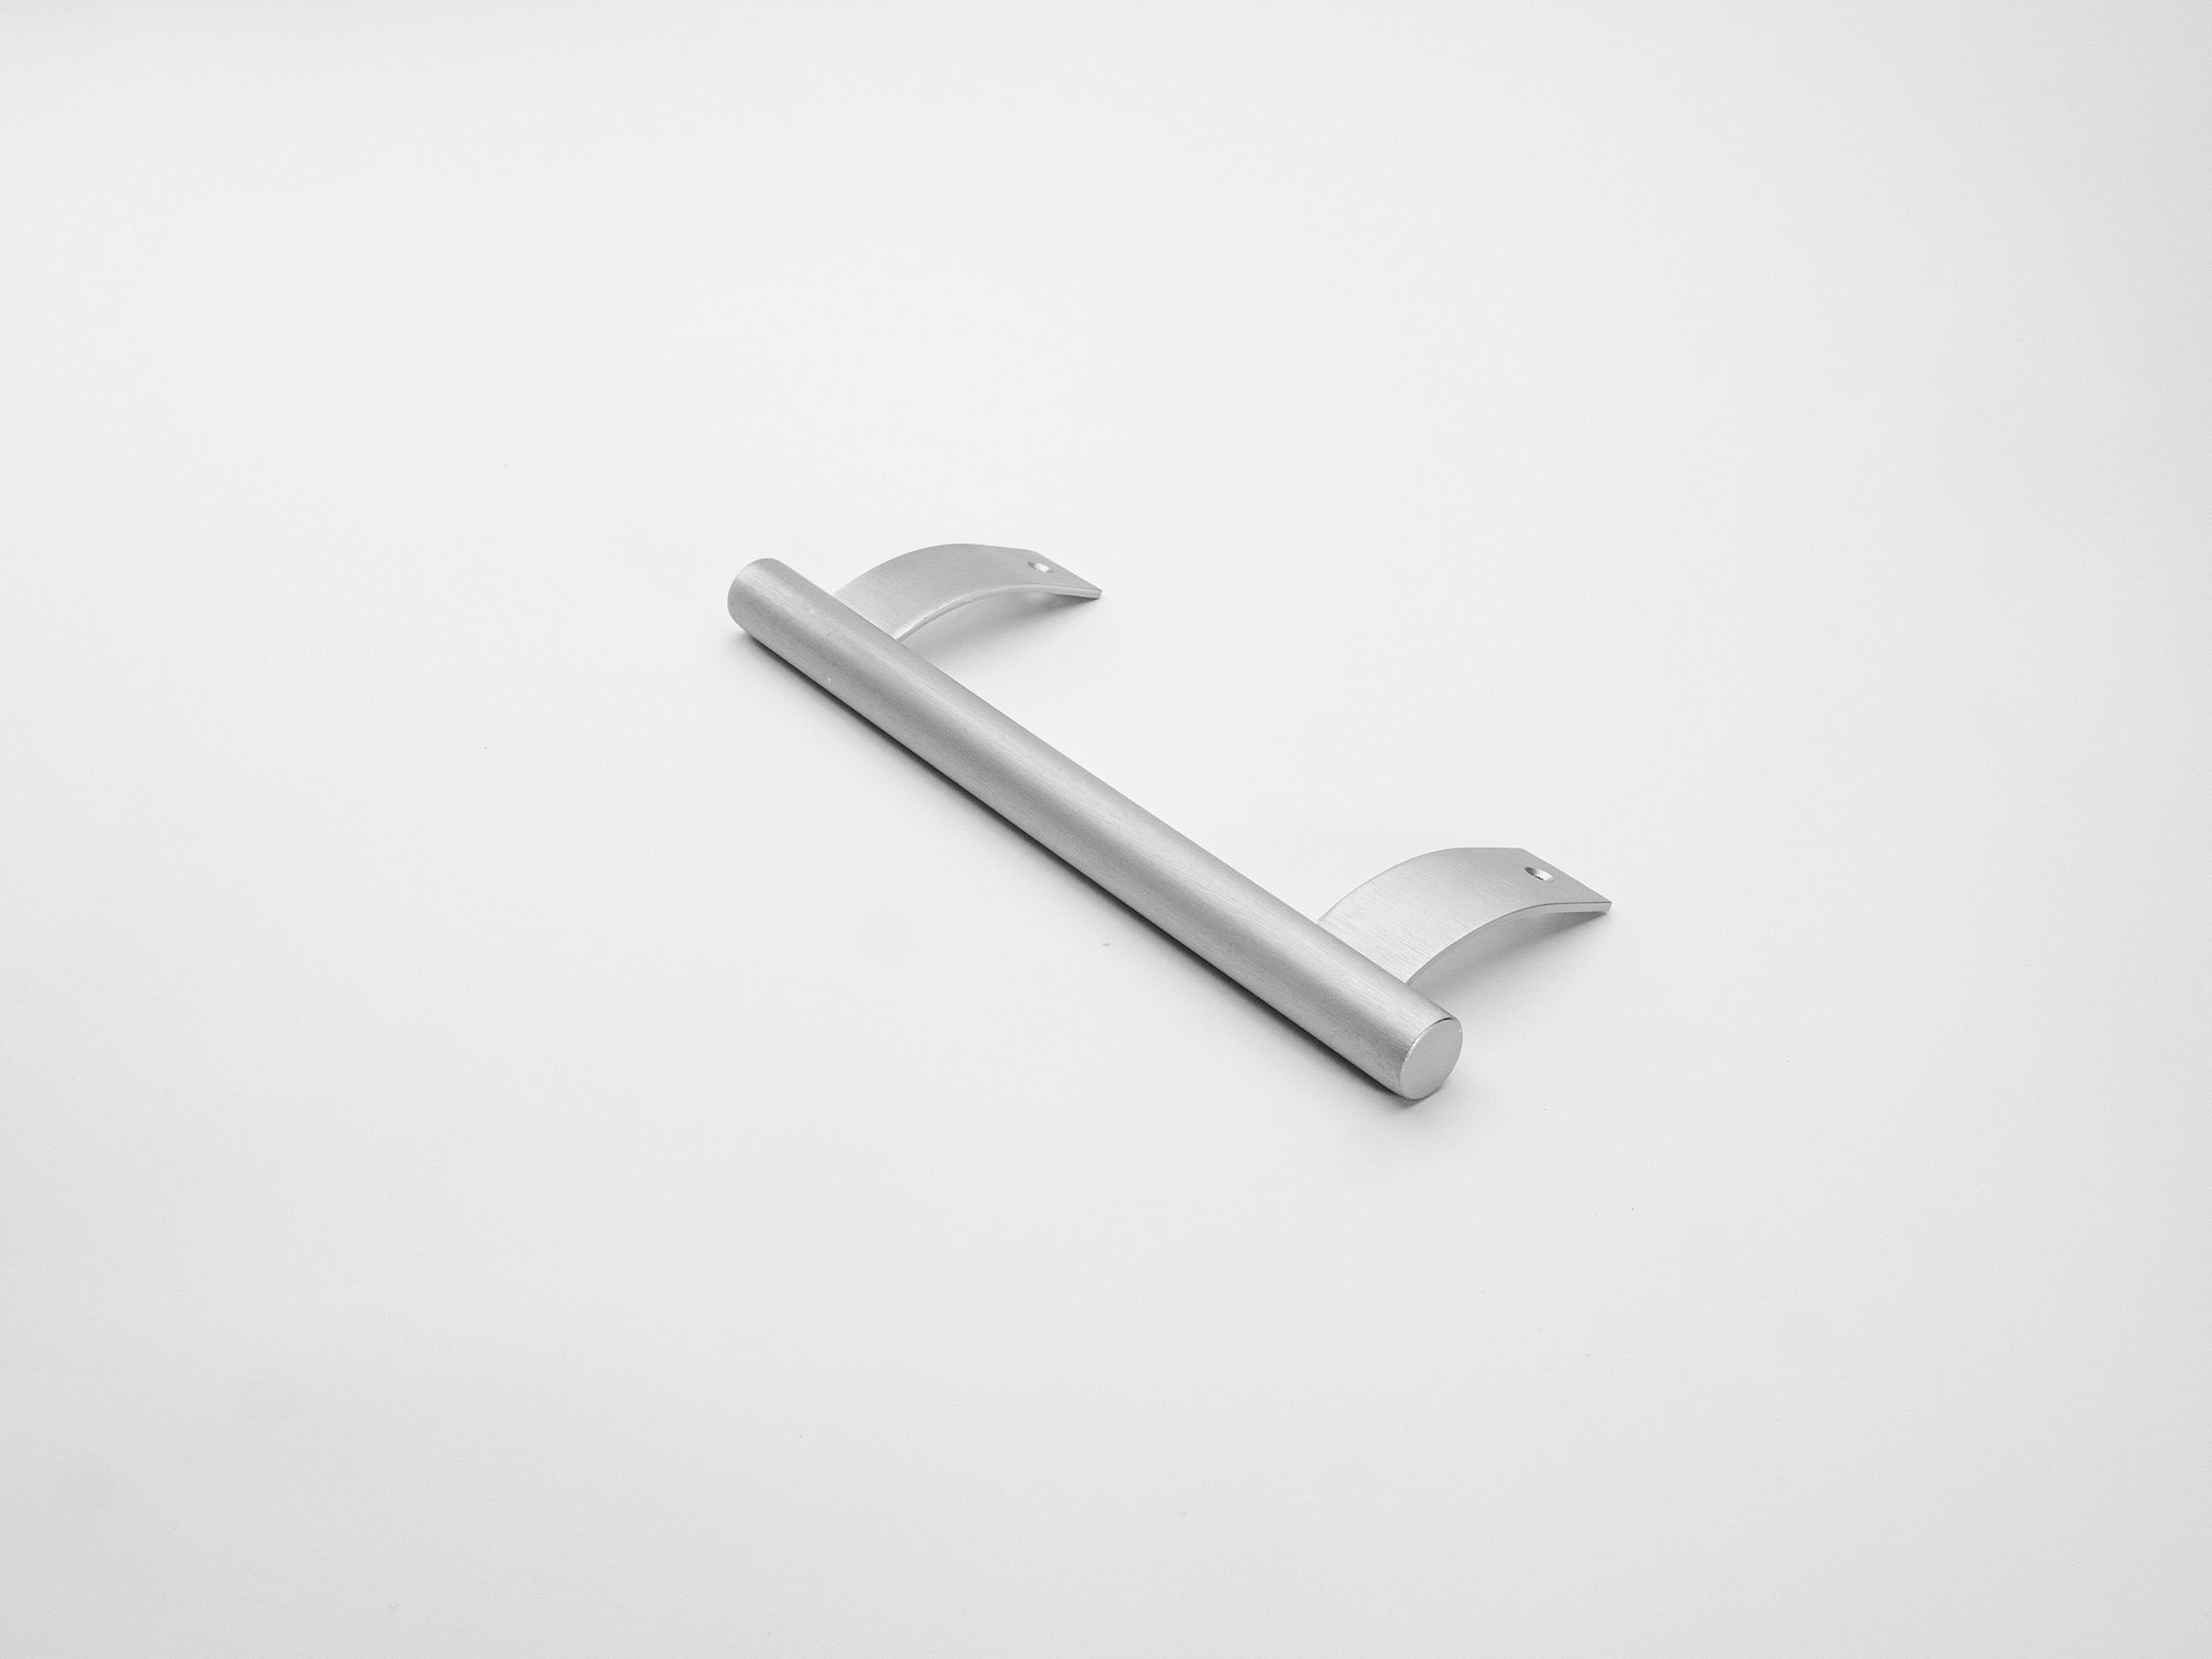 Single piece refrigerator handle - Cut Brushed and Anodized Stainless Steel